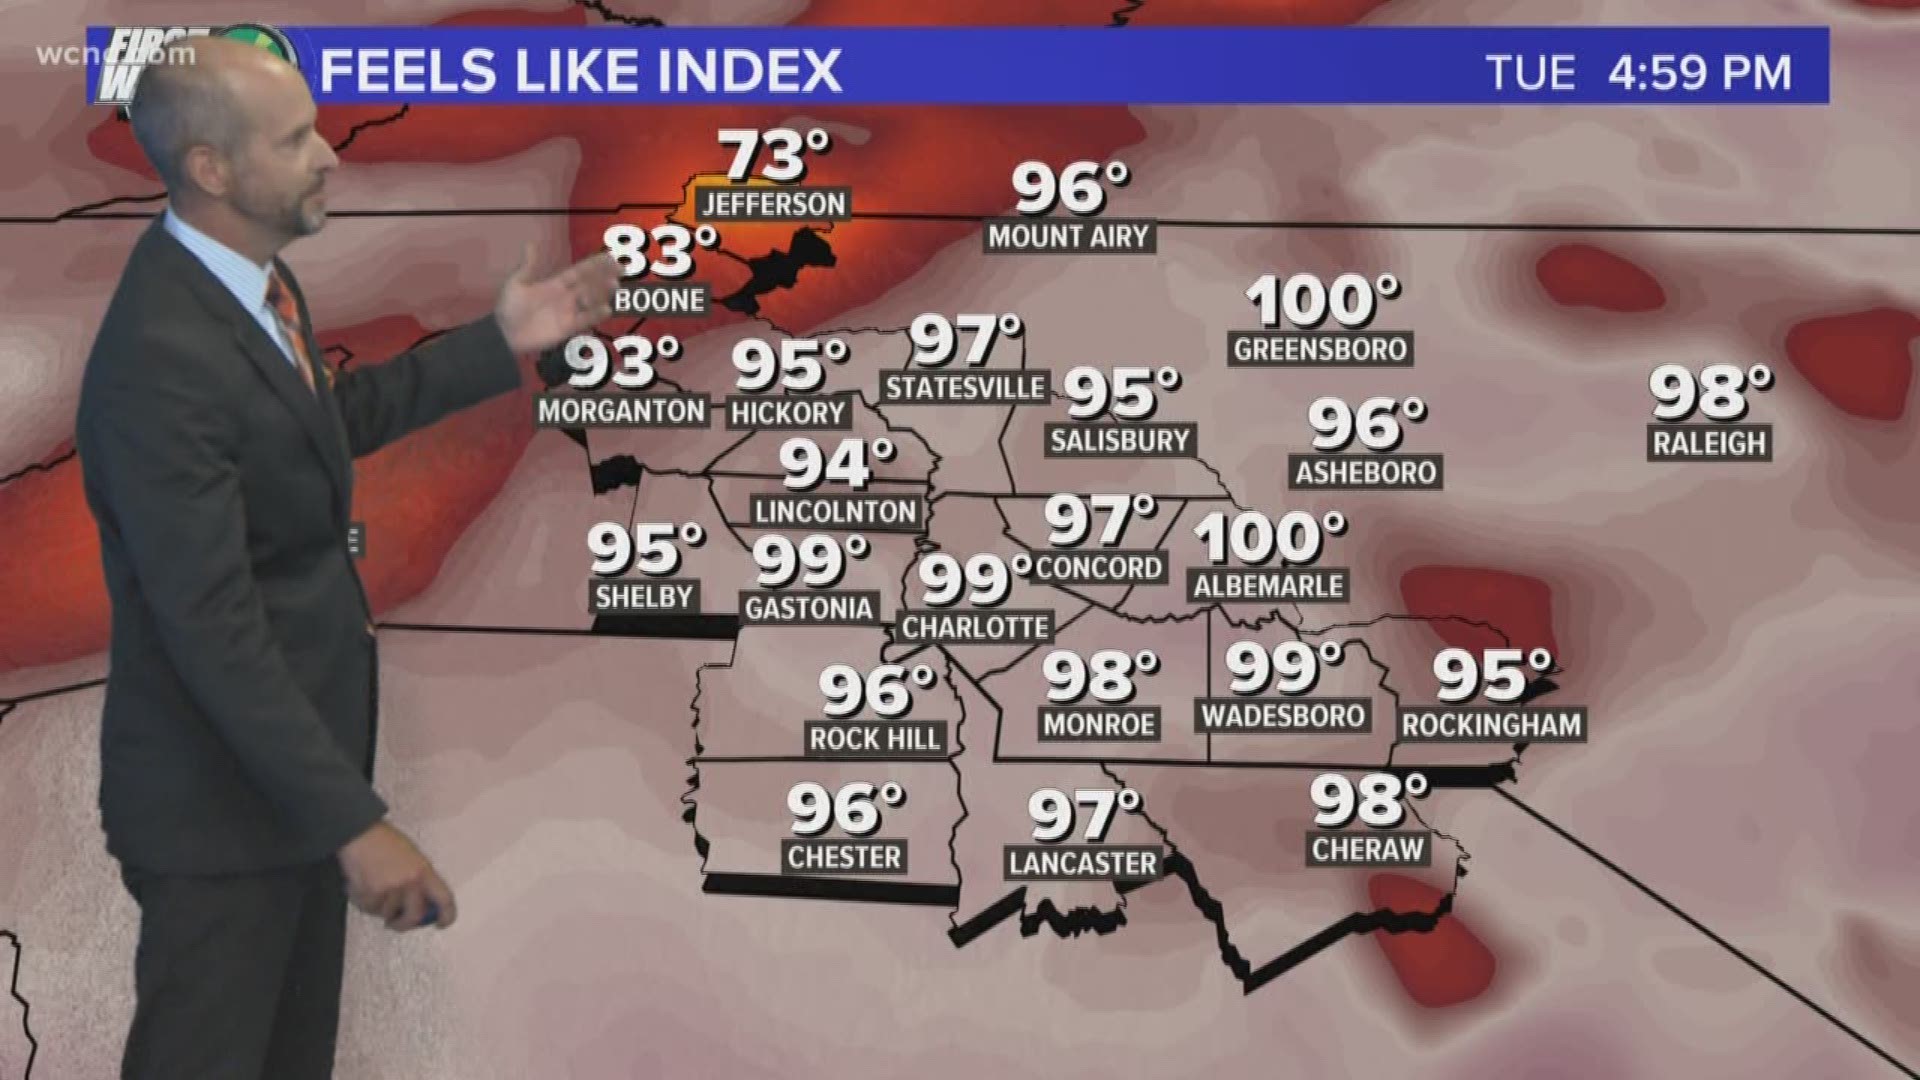 The feels like index across the Charlotte area is showing temperatures at or near 100 degrees Tuesday as a heat wave begins.